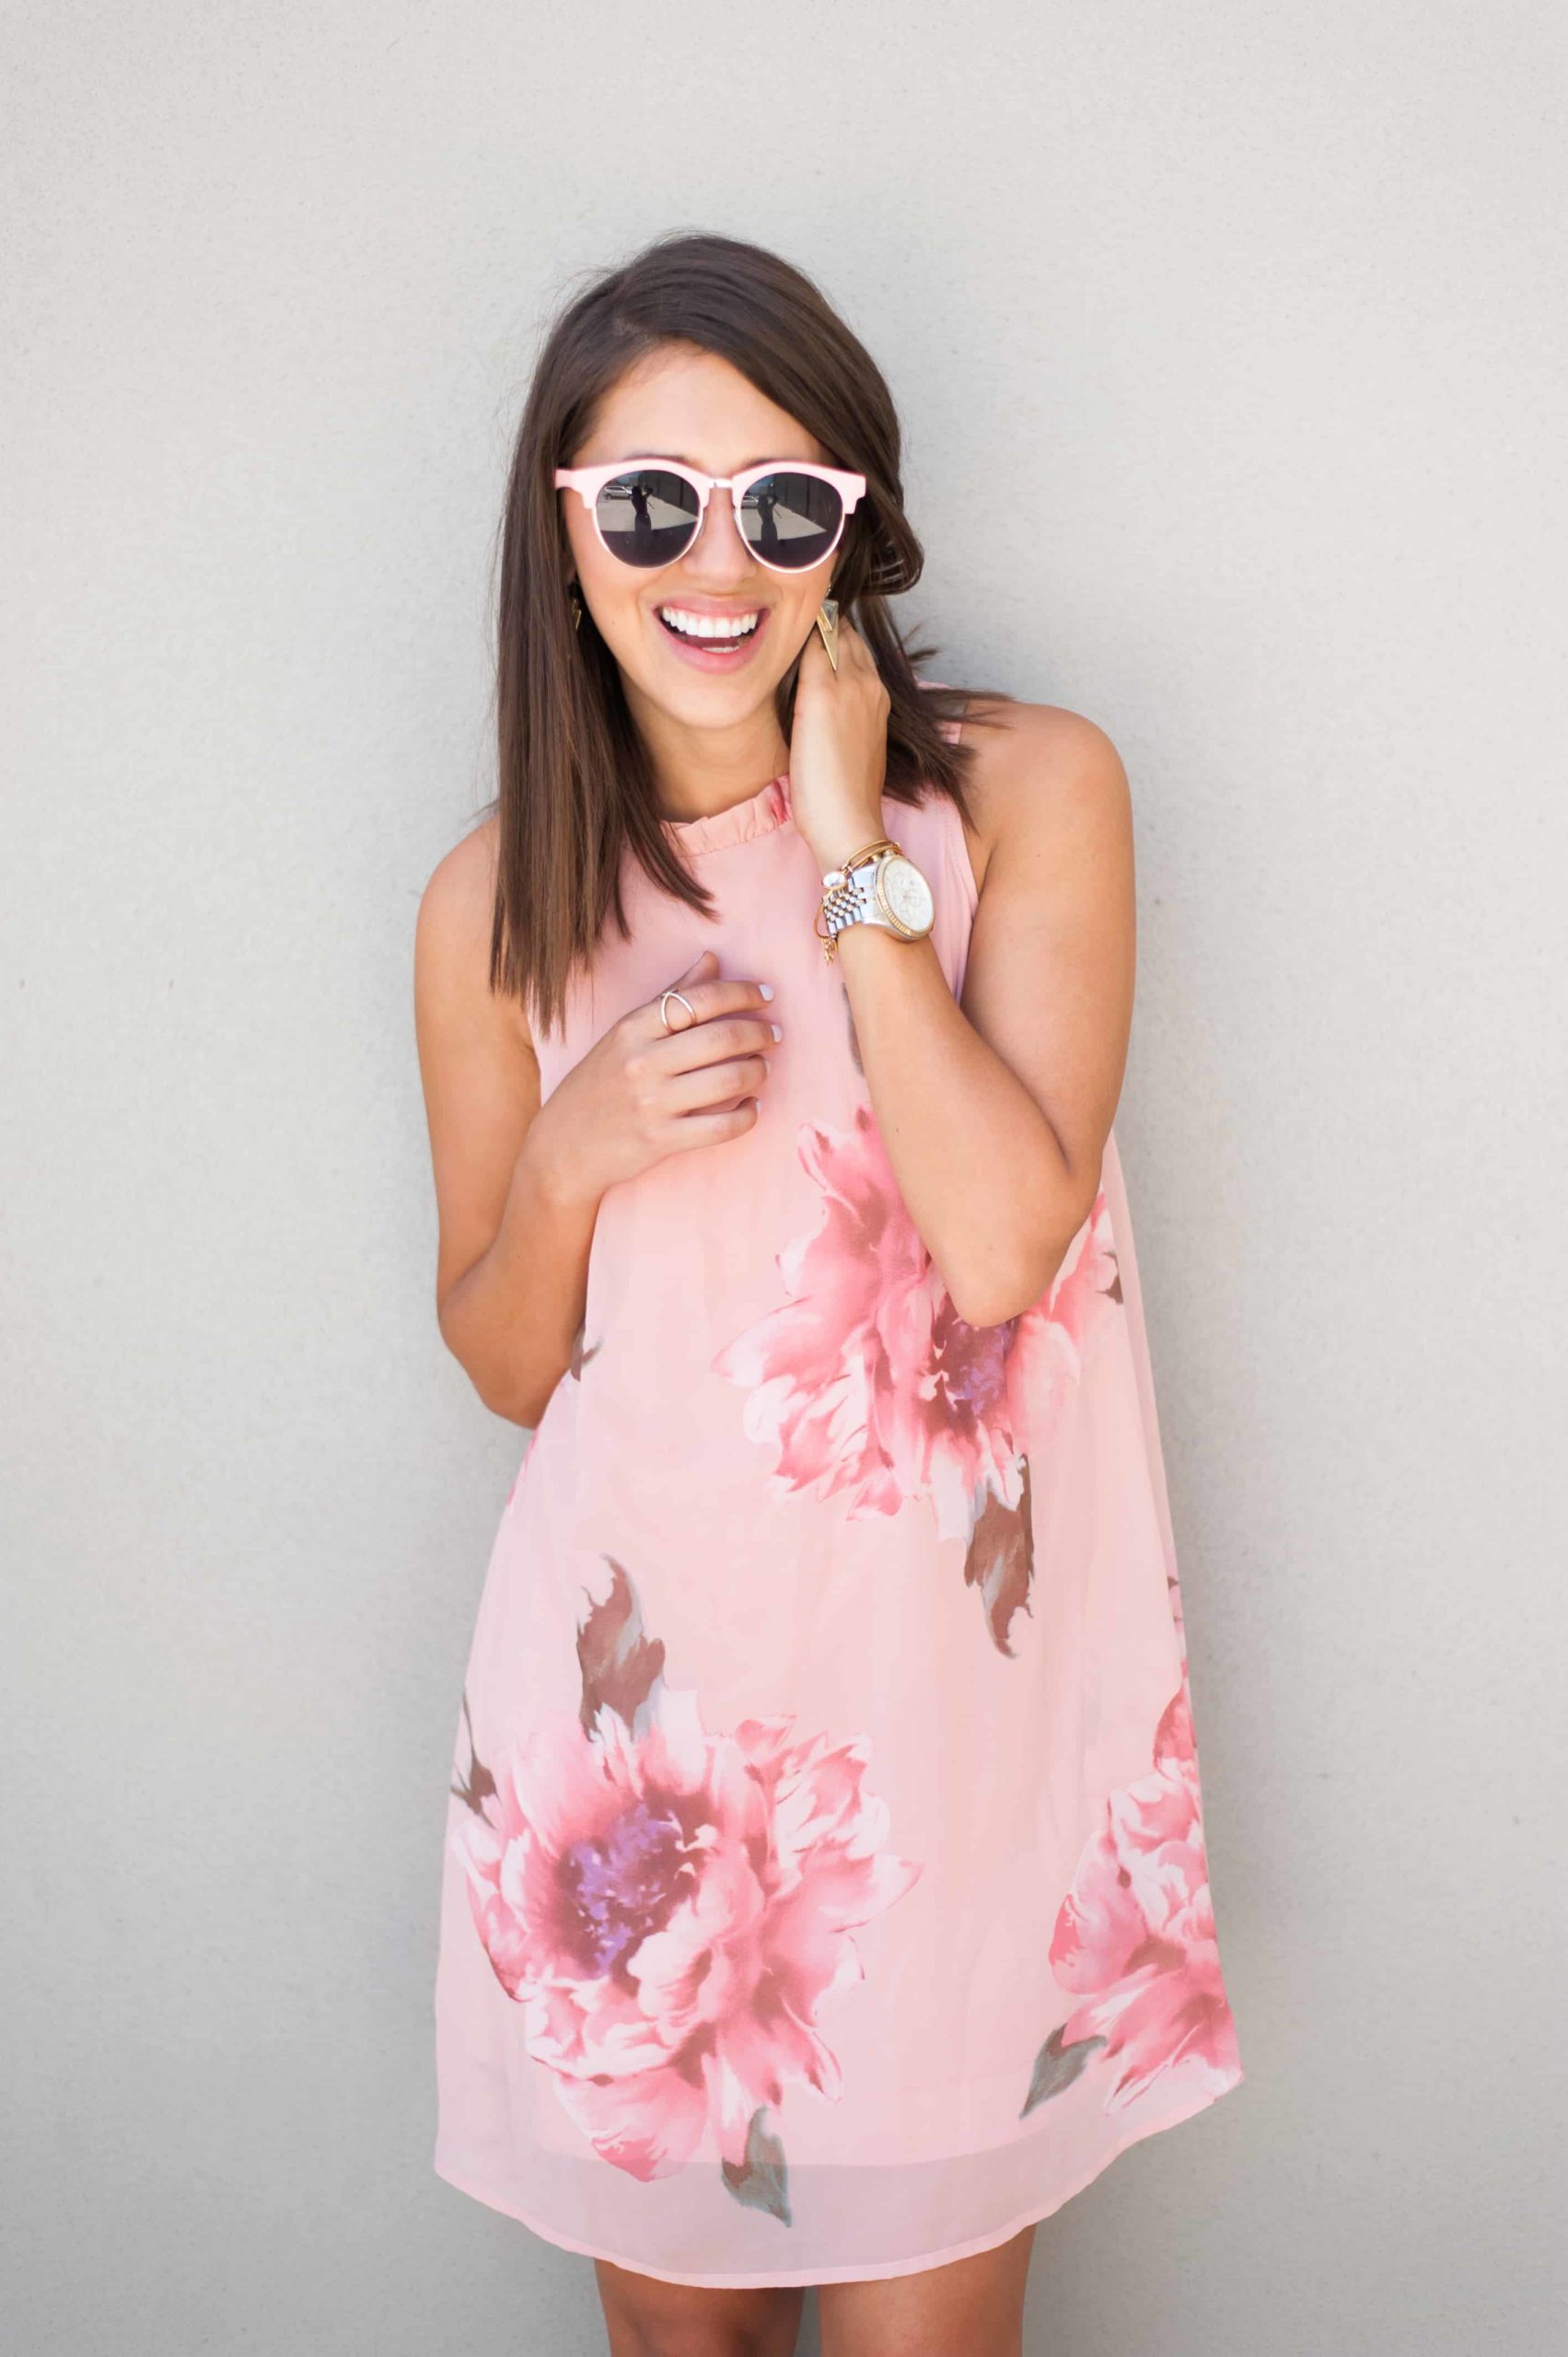 Dress Up Buttercup | Houston Fashion Blog - Dede Raad | A dress that screams Mothers Day